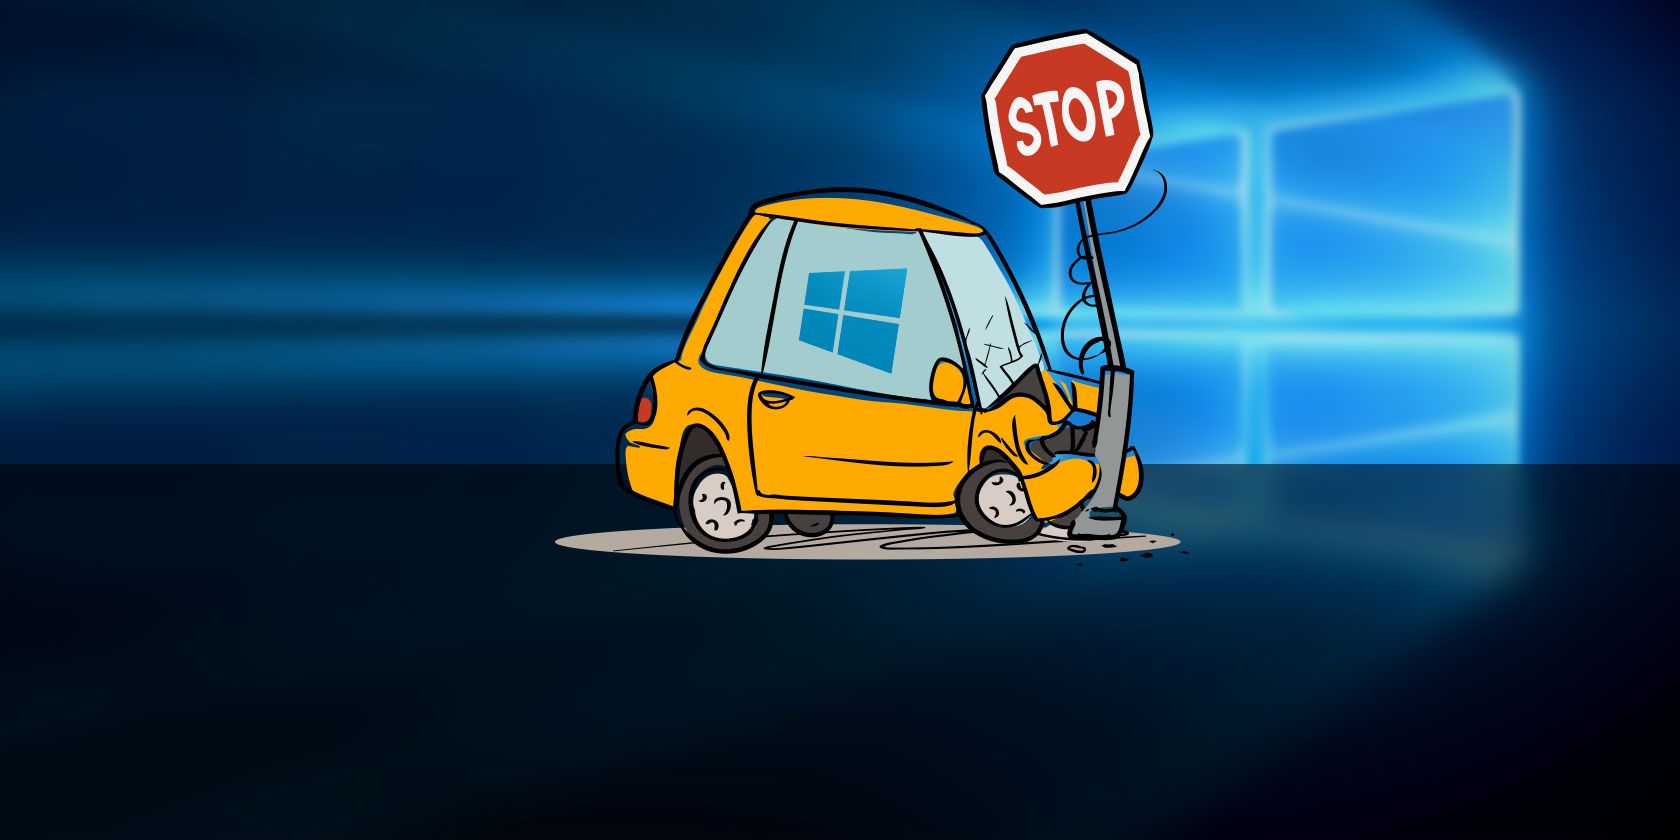 Critical Process Died In Windows 10 How To Fix This Stop Code